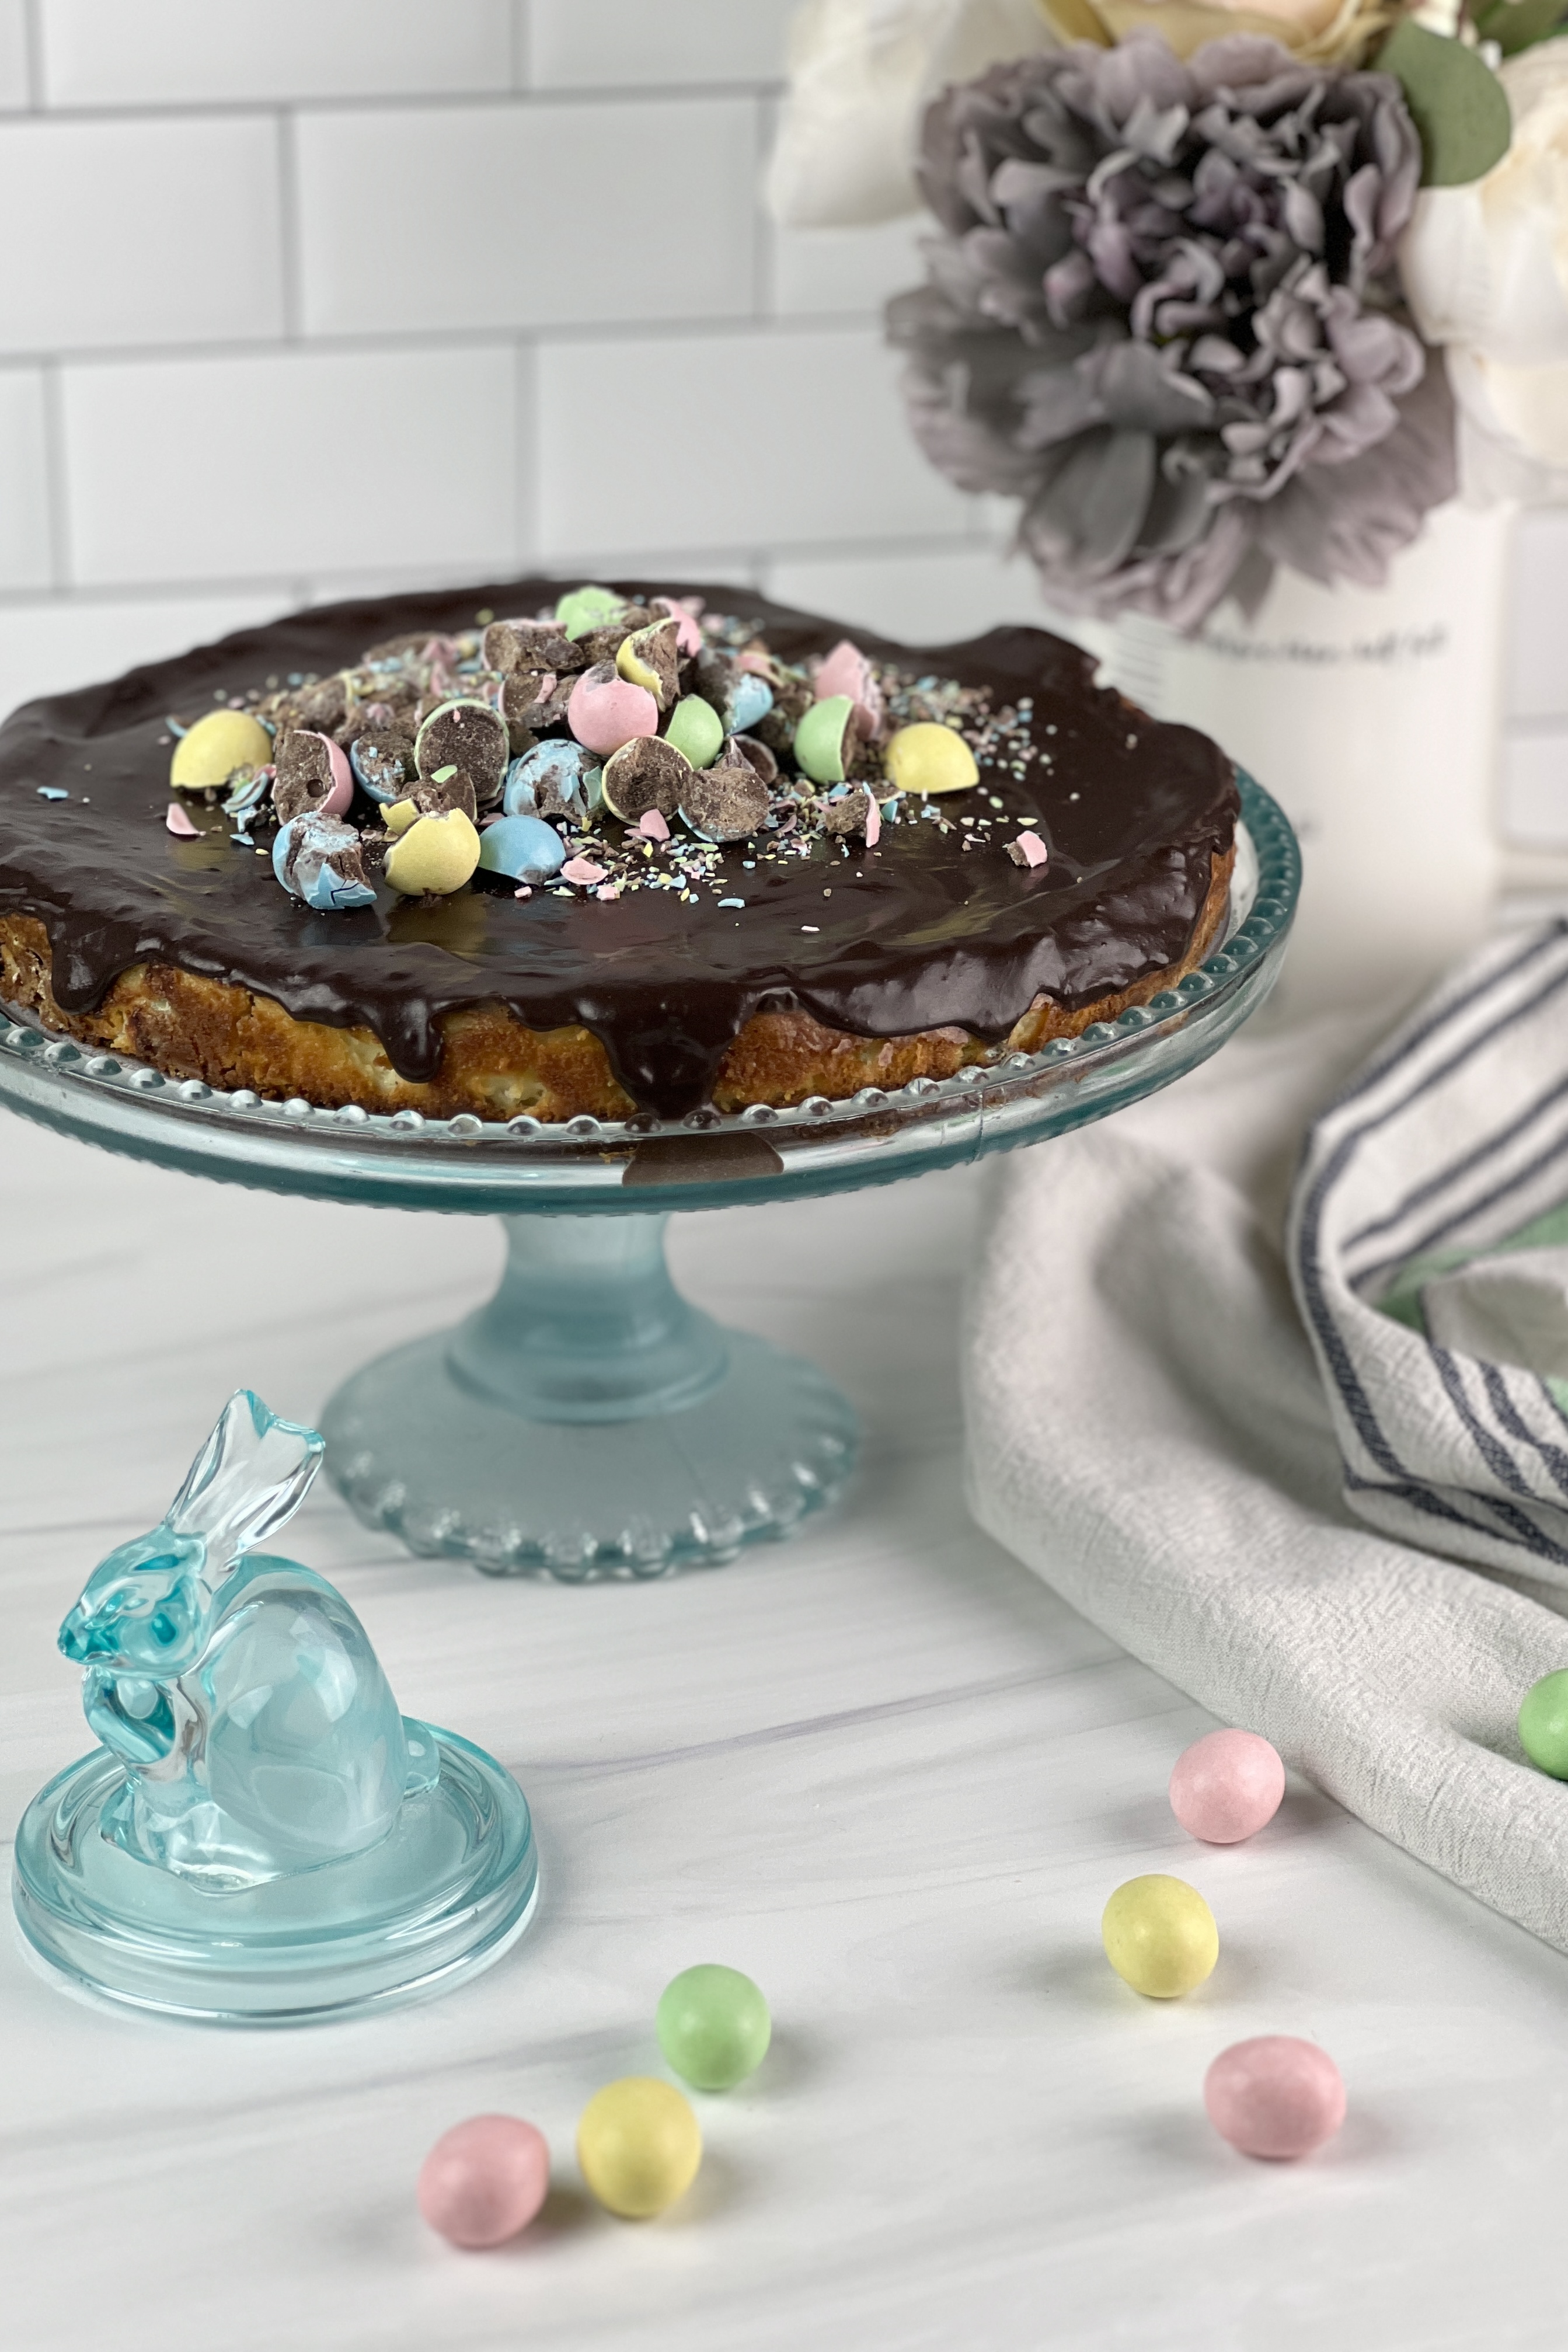 This creamy Easter egg cheesecake is packed with mini chocolate eggs, has a graham cracker crust, and is topped with chocolate ganache and mini chocolate eggs.